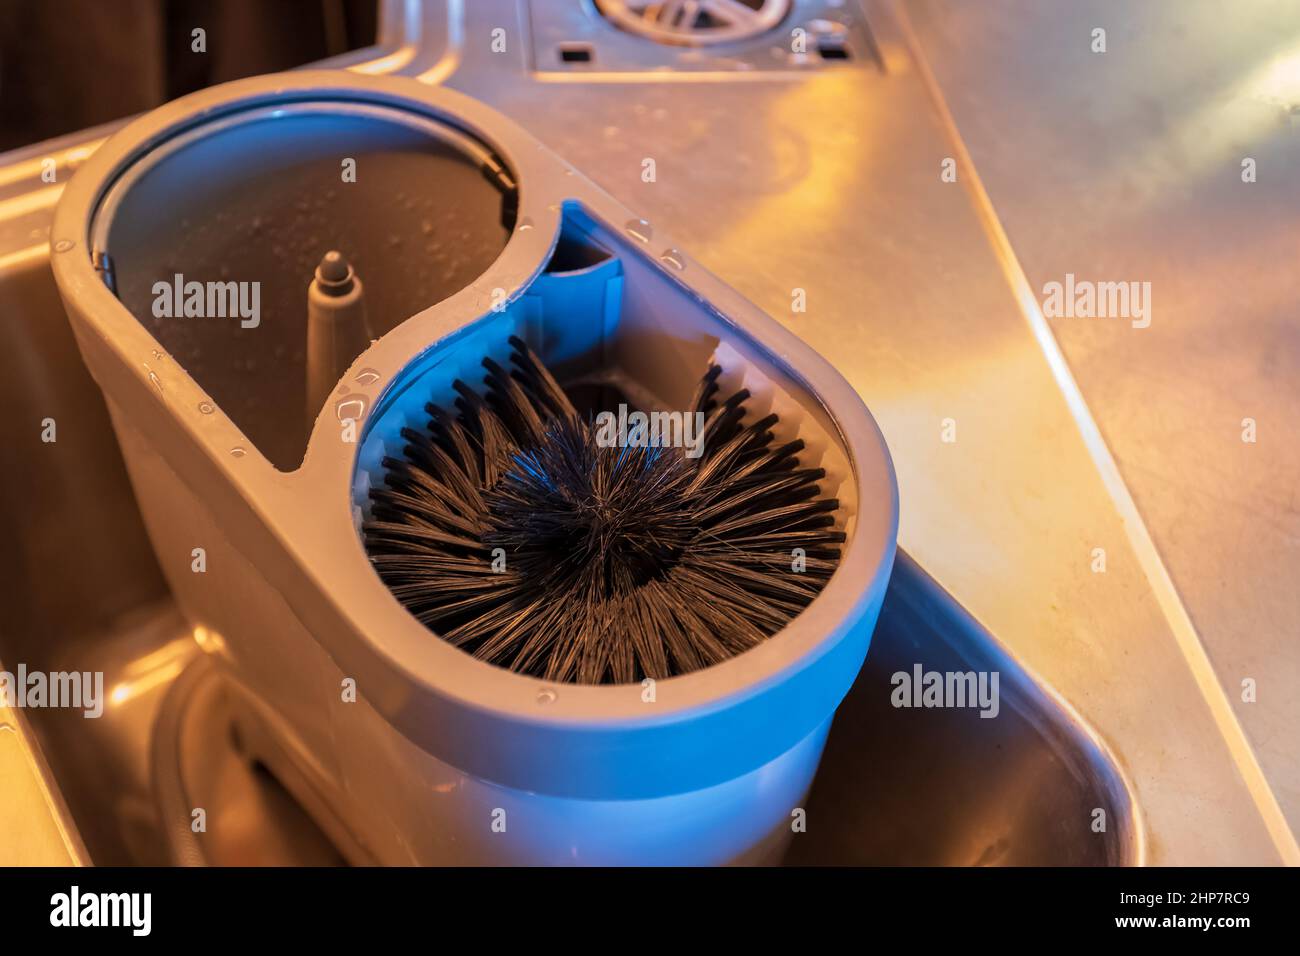 Beer glass washing equipment - Spulboy. Inside are brushes for washing glass. Stock Photo